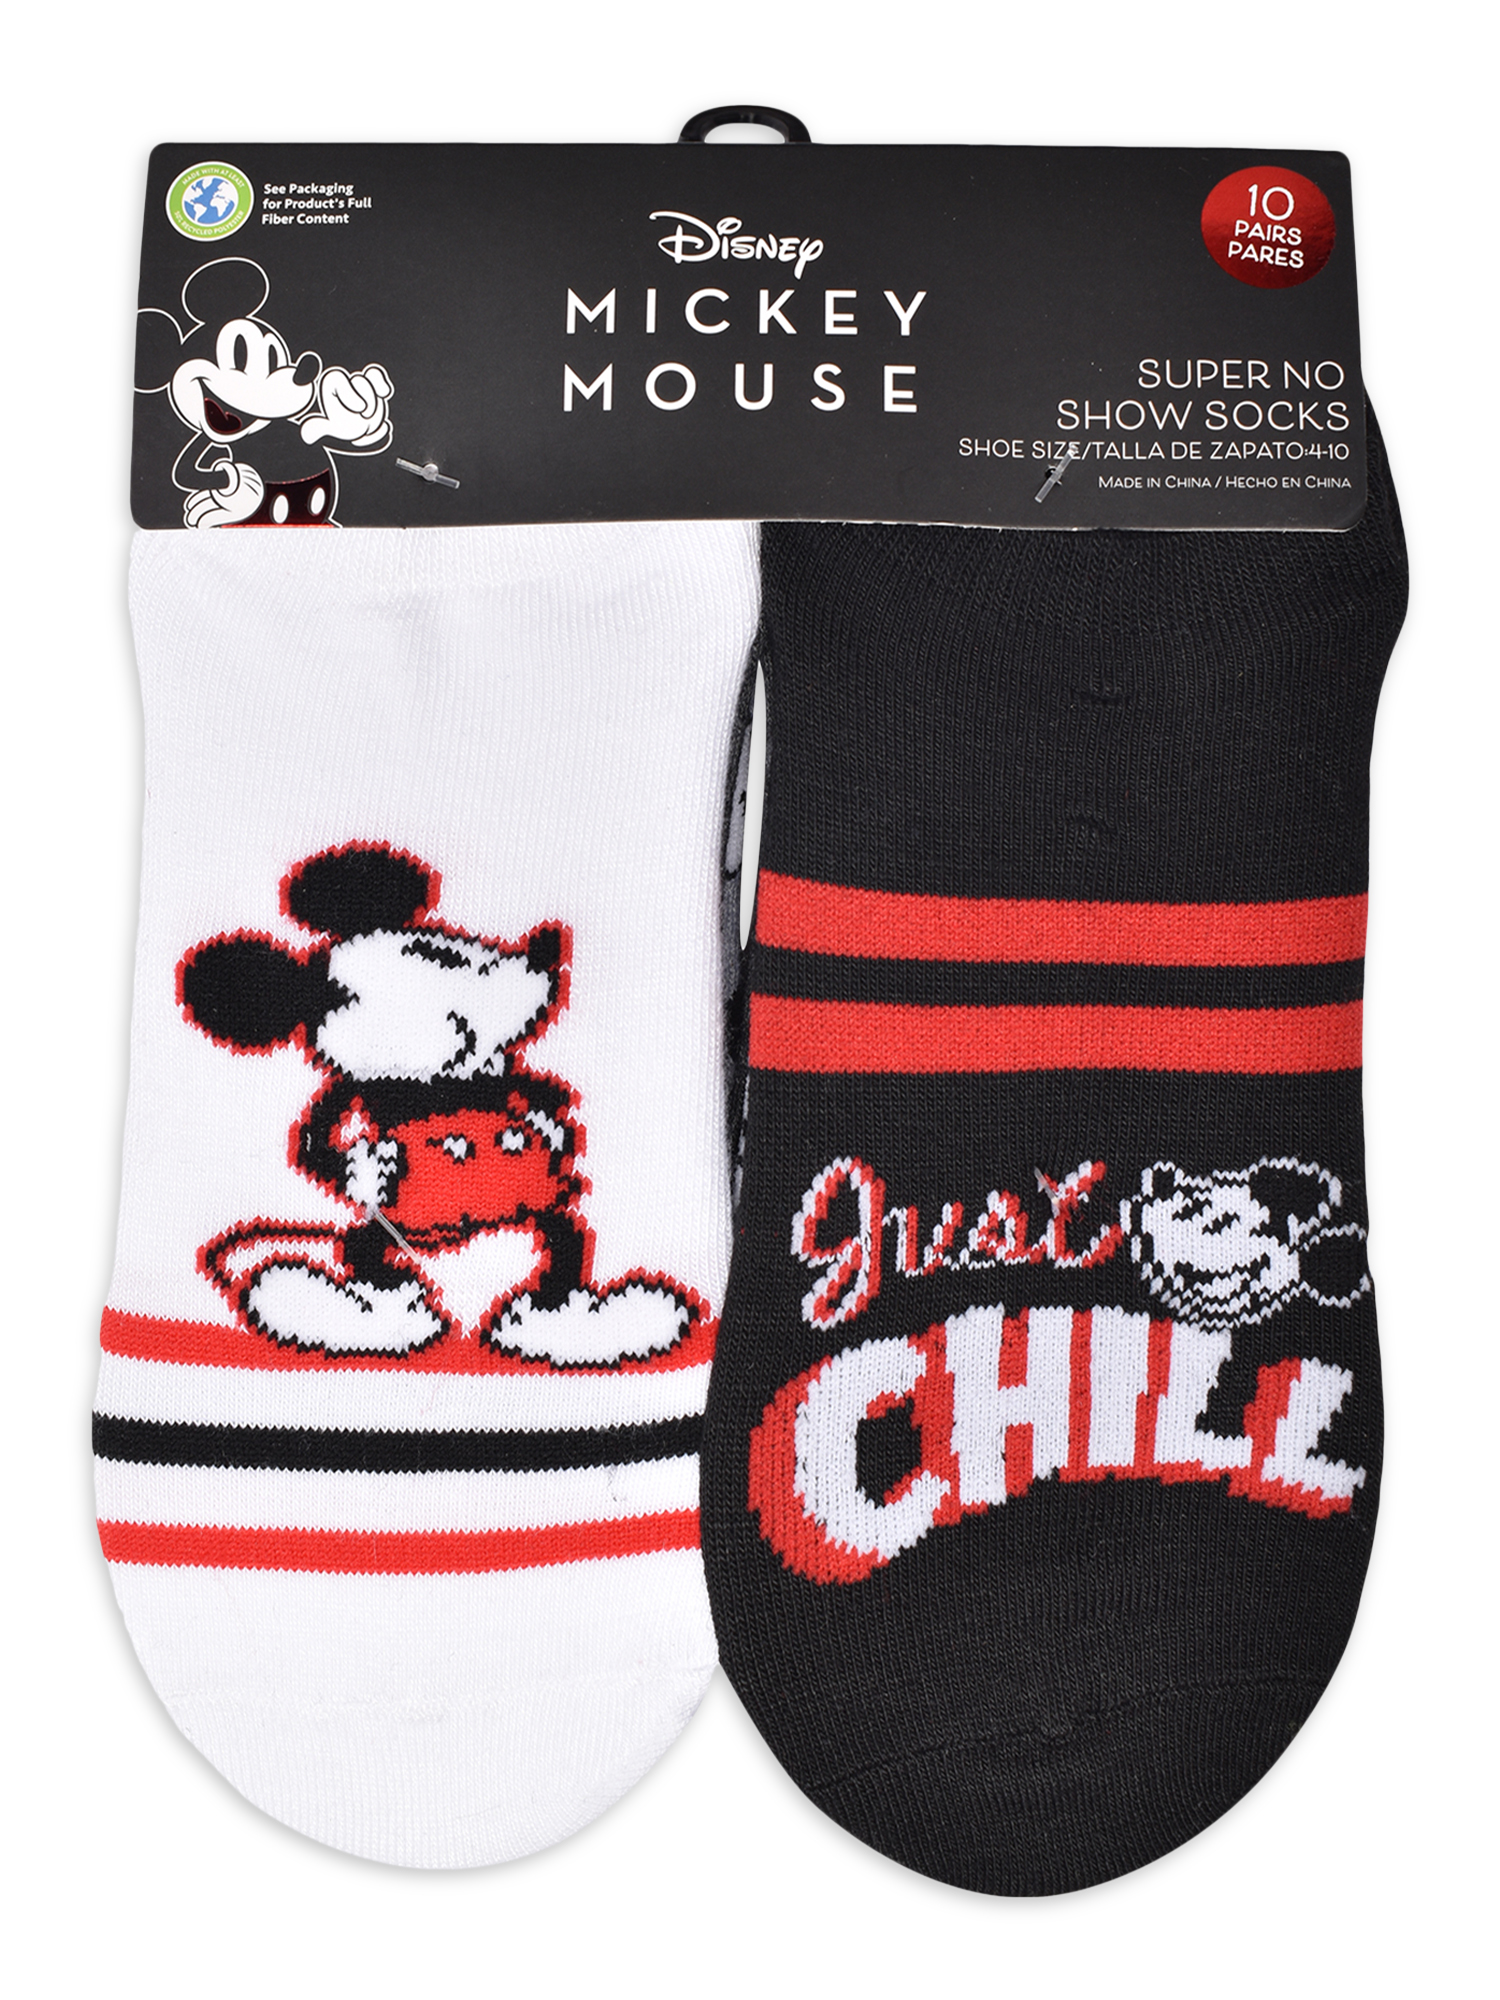 Disney Mickey Mouse Womens Graphic Super No Show Socks, 10-Pack, Sizes 4-10 - image 2 of 5